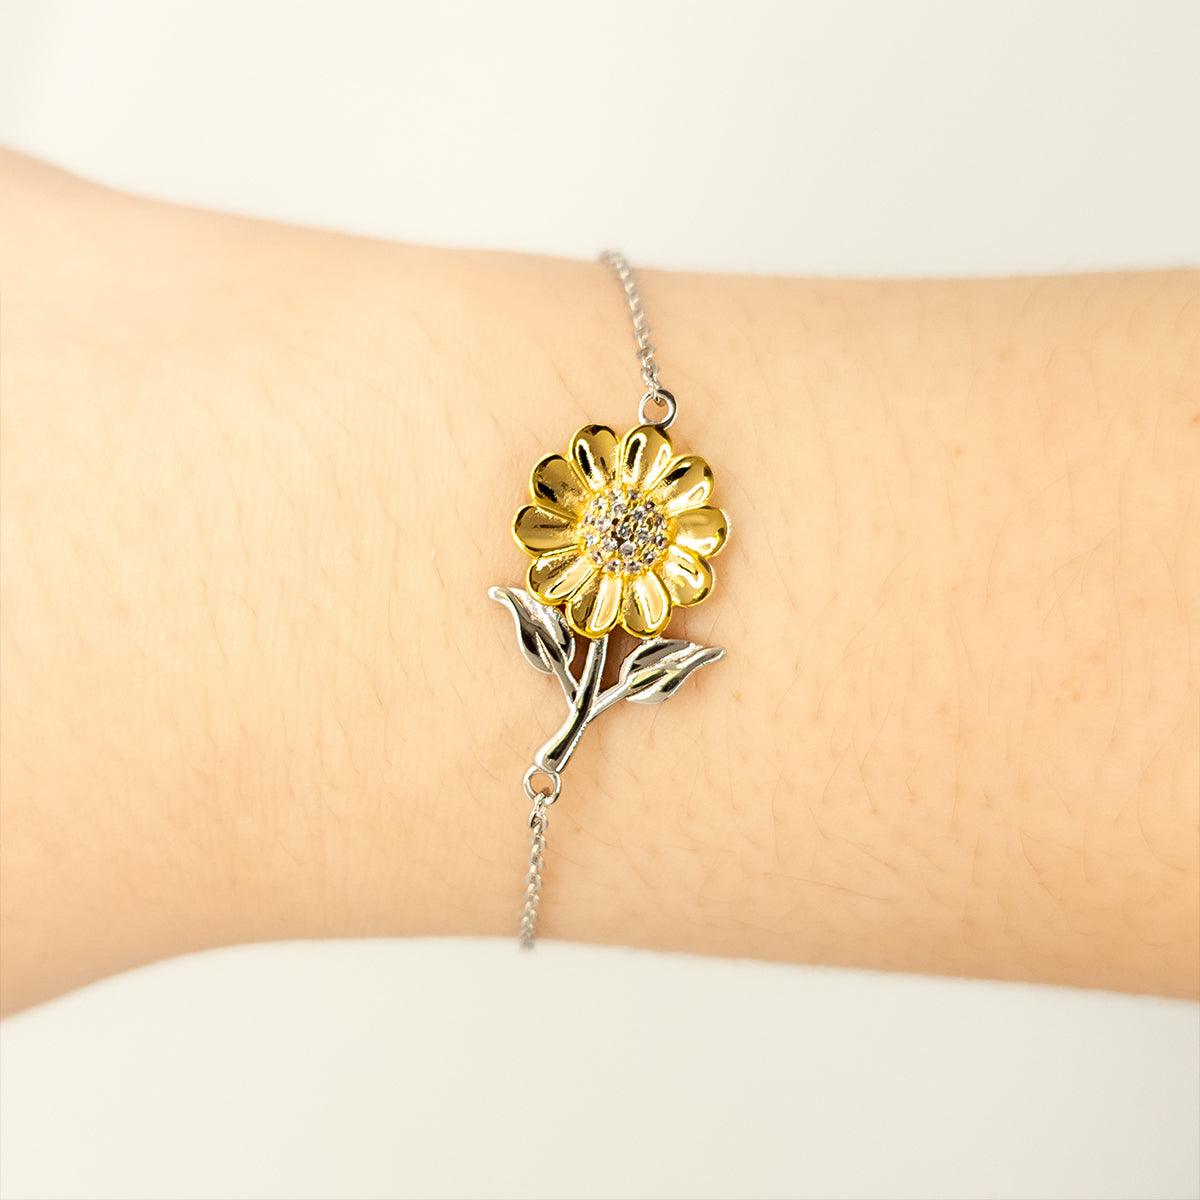 Remarkable Parking Lot Attendant Gifts, Your dedication and hard work, Inspirational Birthday Christmas Unique Sunflower Bracelet For Parking Lot Attendant, Coworkers, Men, Women, Friends - Mallard Moon Gift Shop